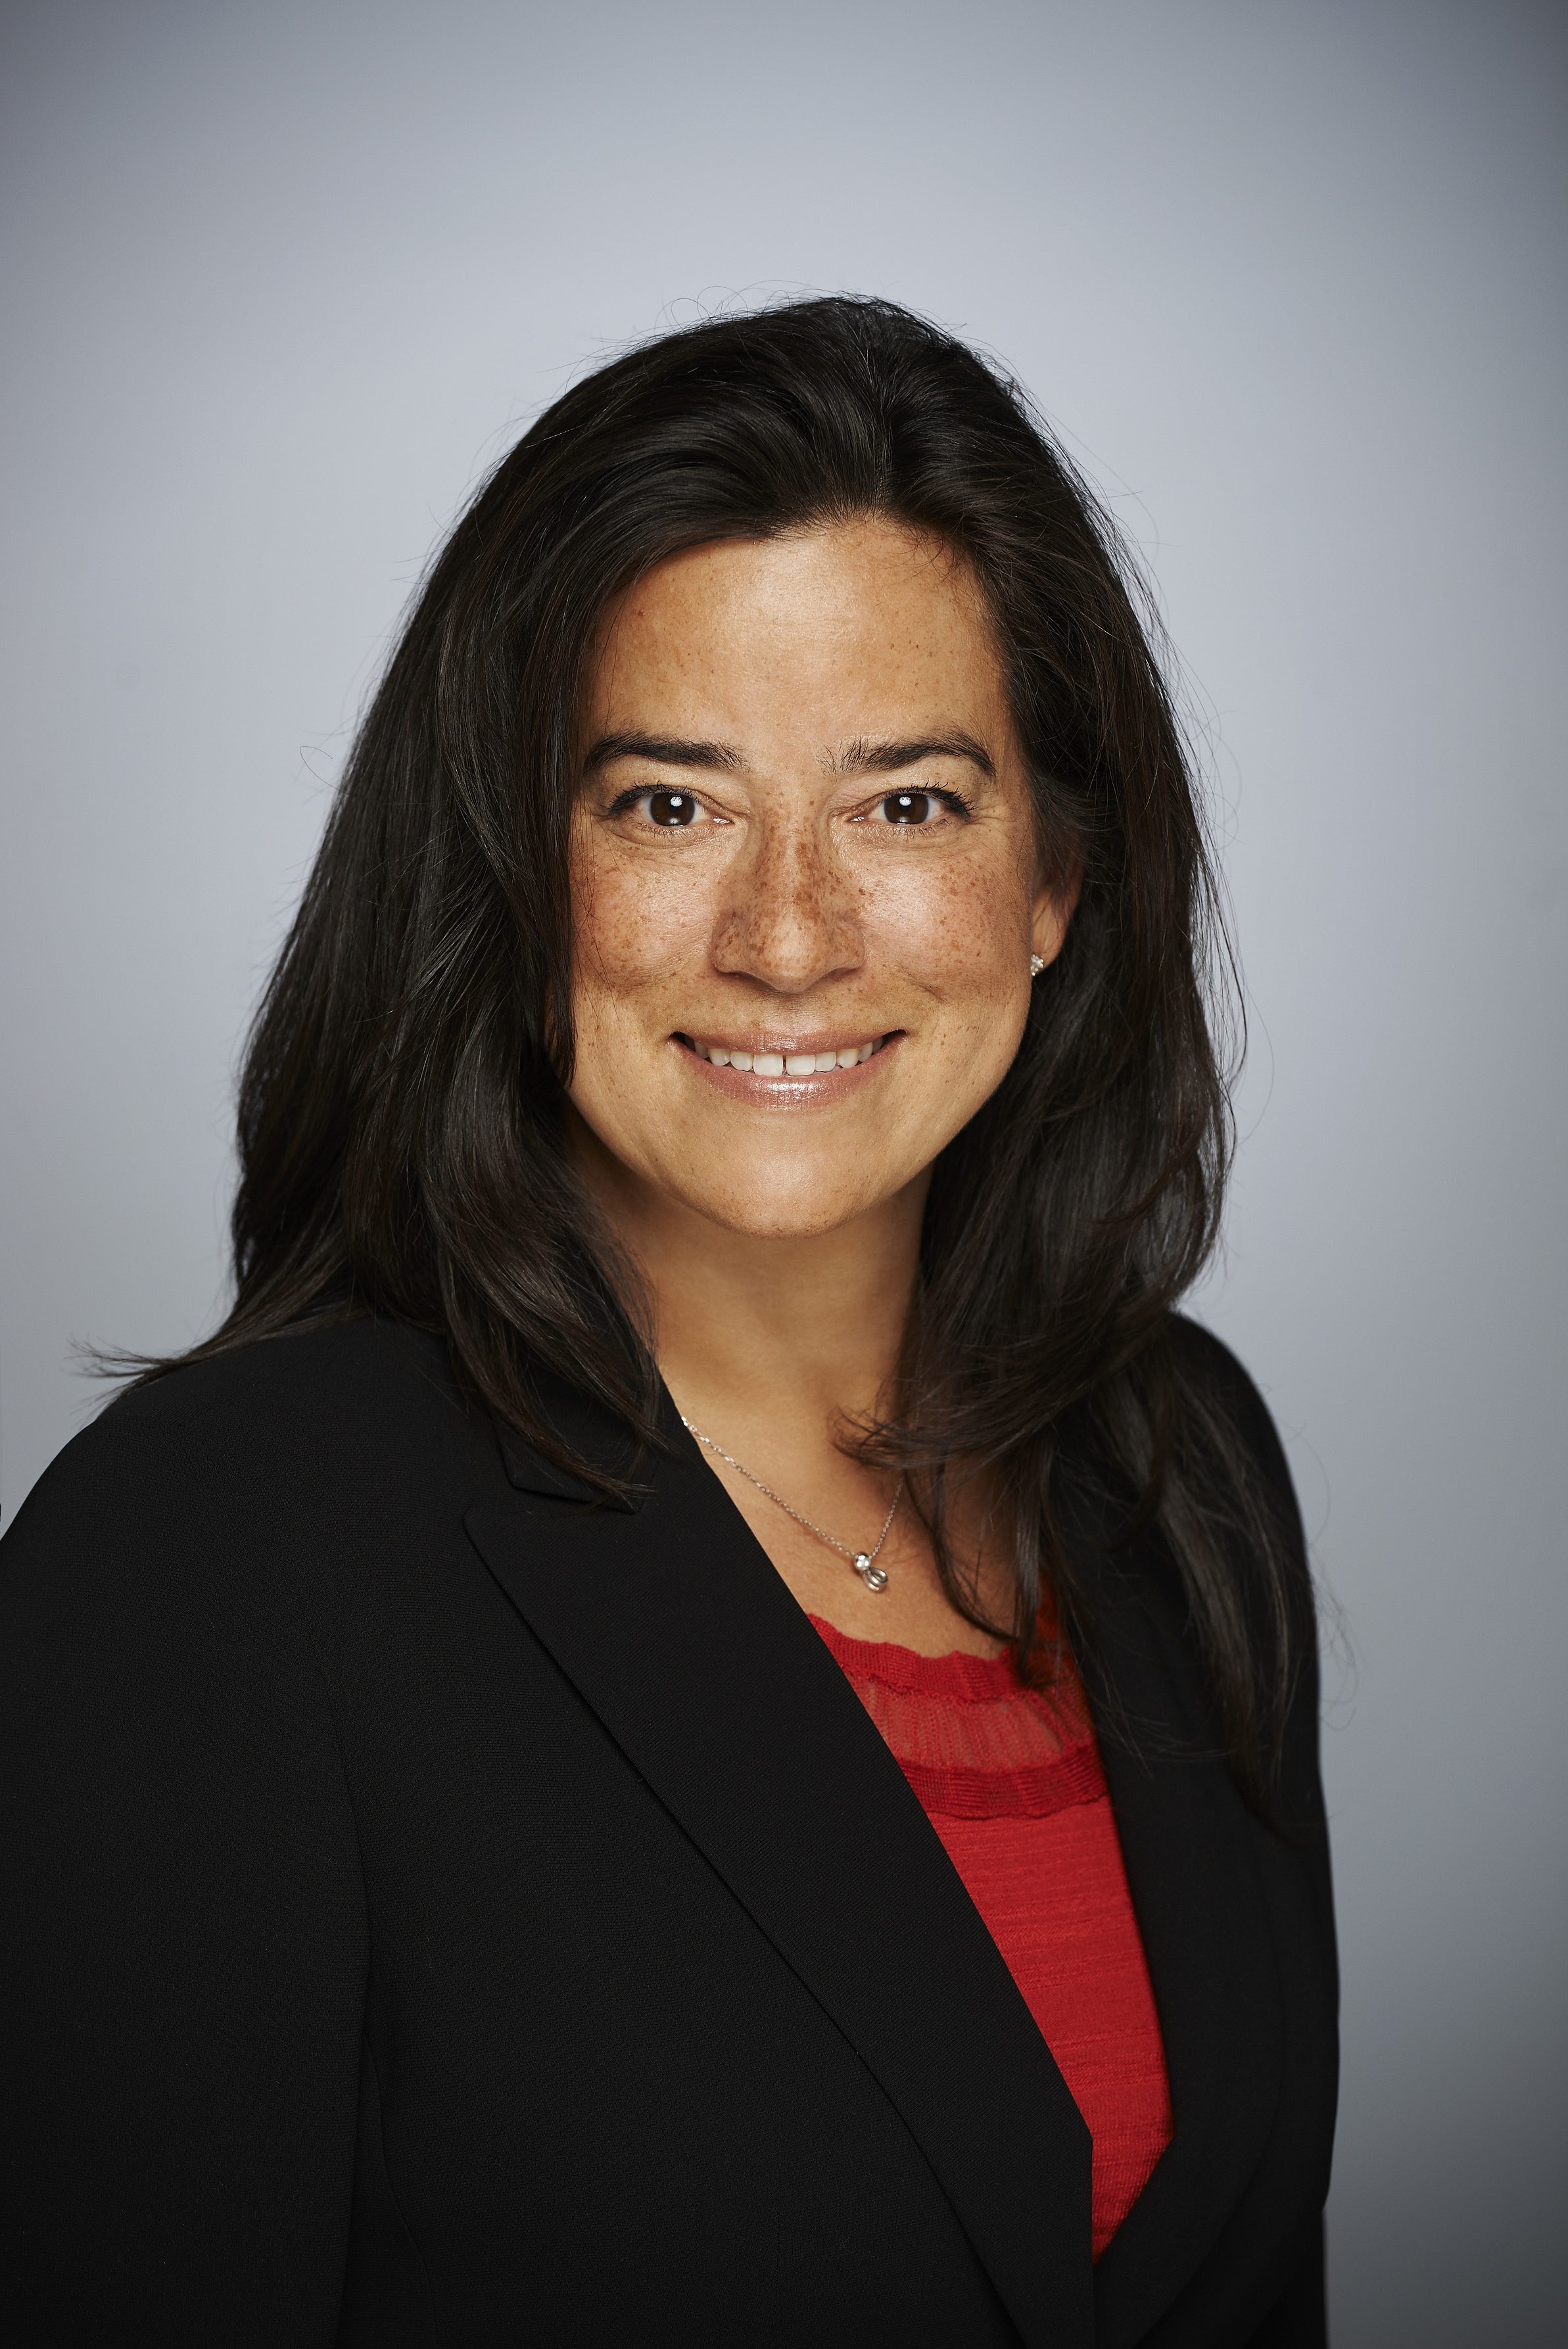 Why we need to pay attention, Jody Wilson-Raybould isn’t the only one